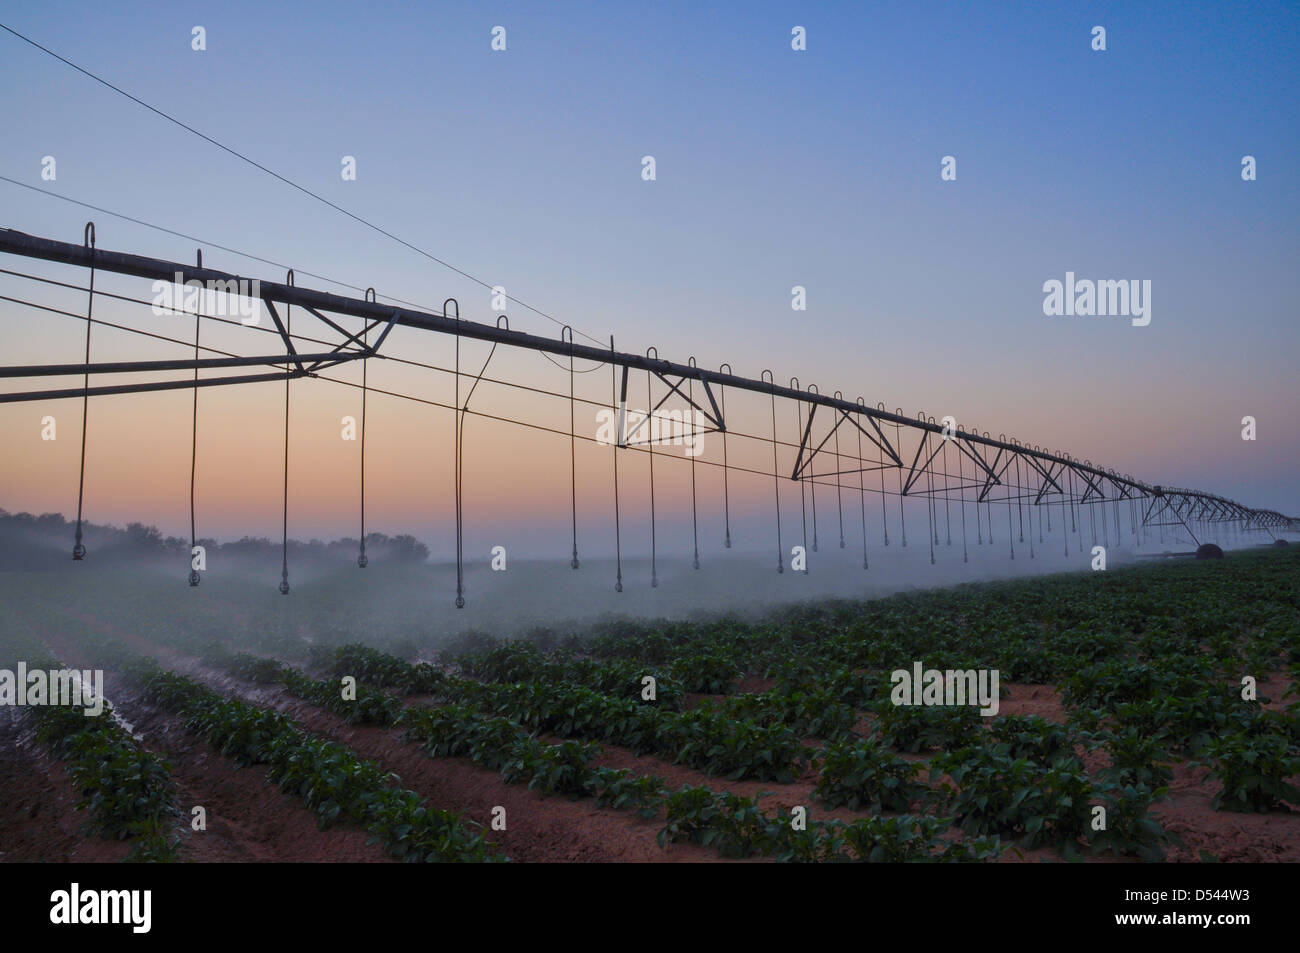 Computerized Mobile Watering System at sunrise Photographed in Israel, Negev, Kibbutz Dorot Stock Photo